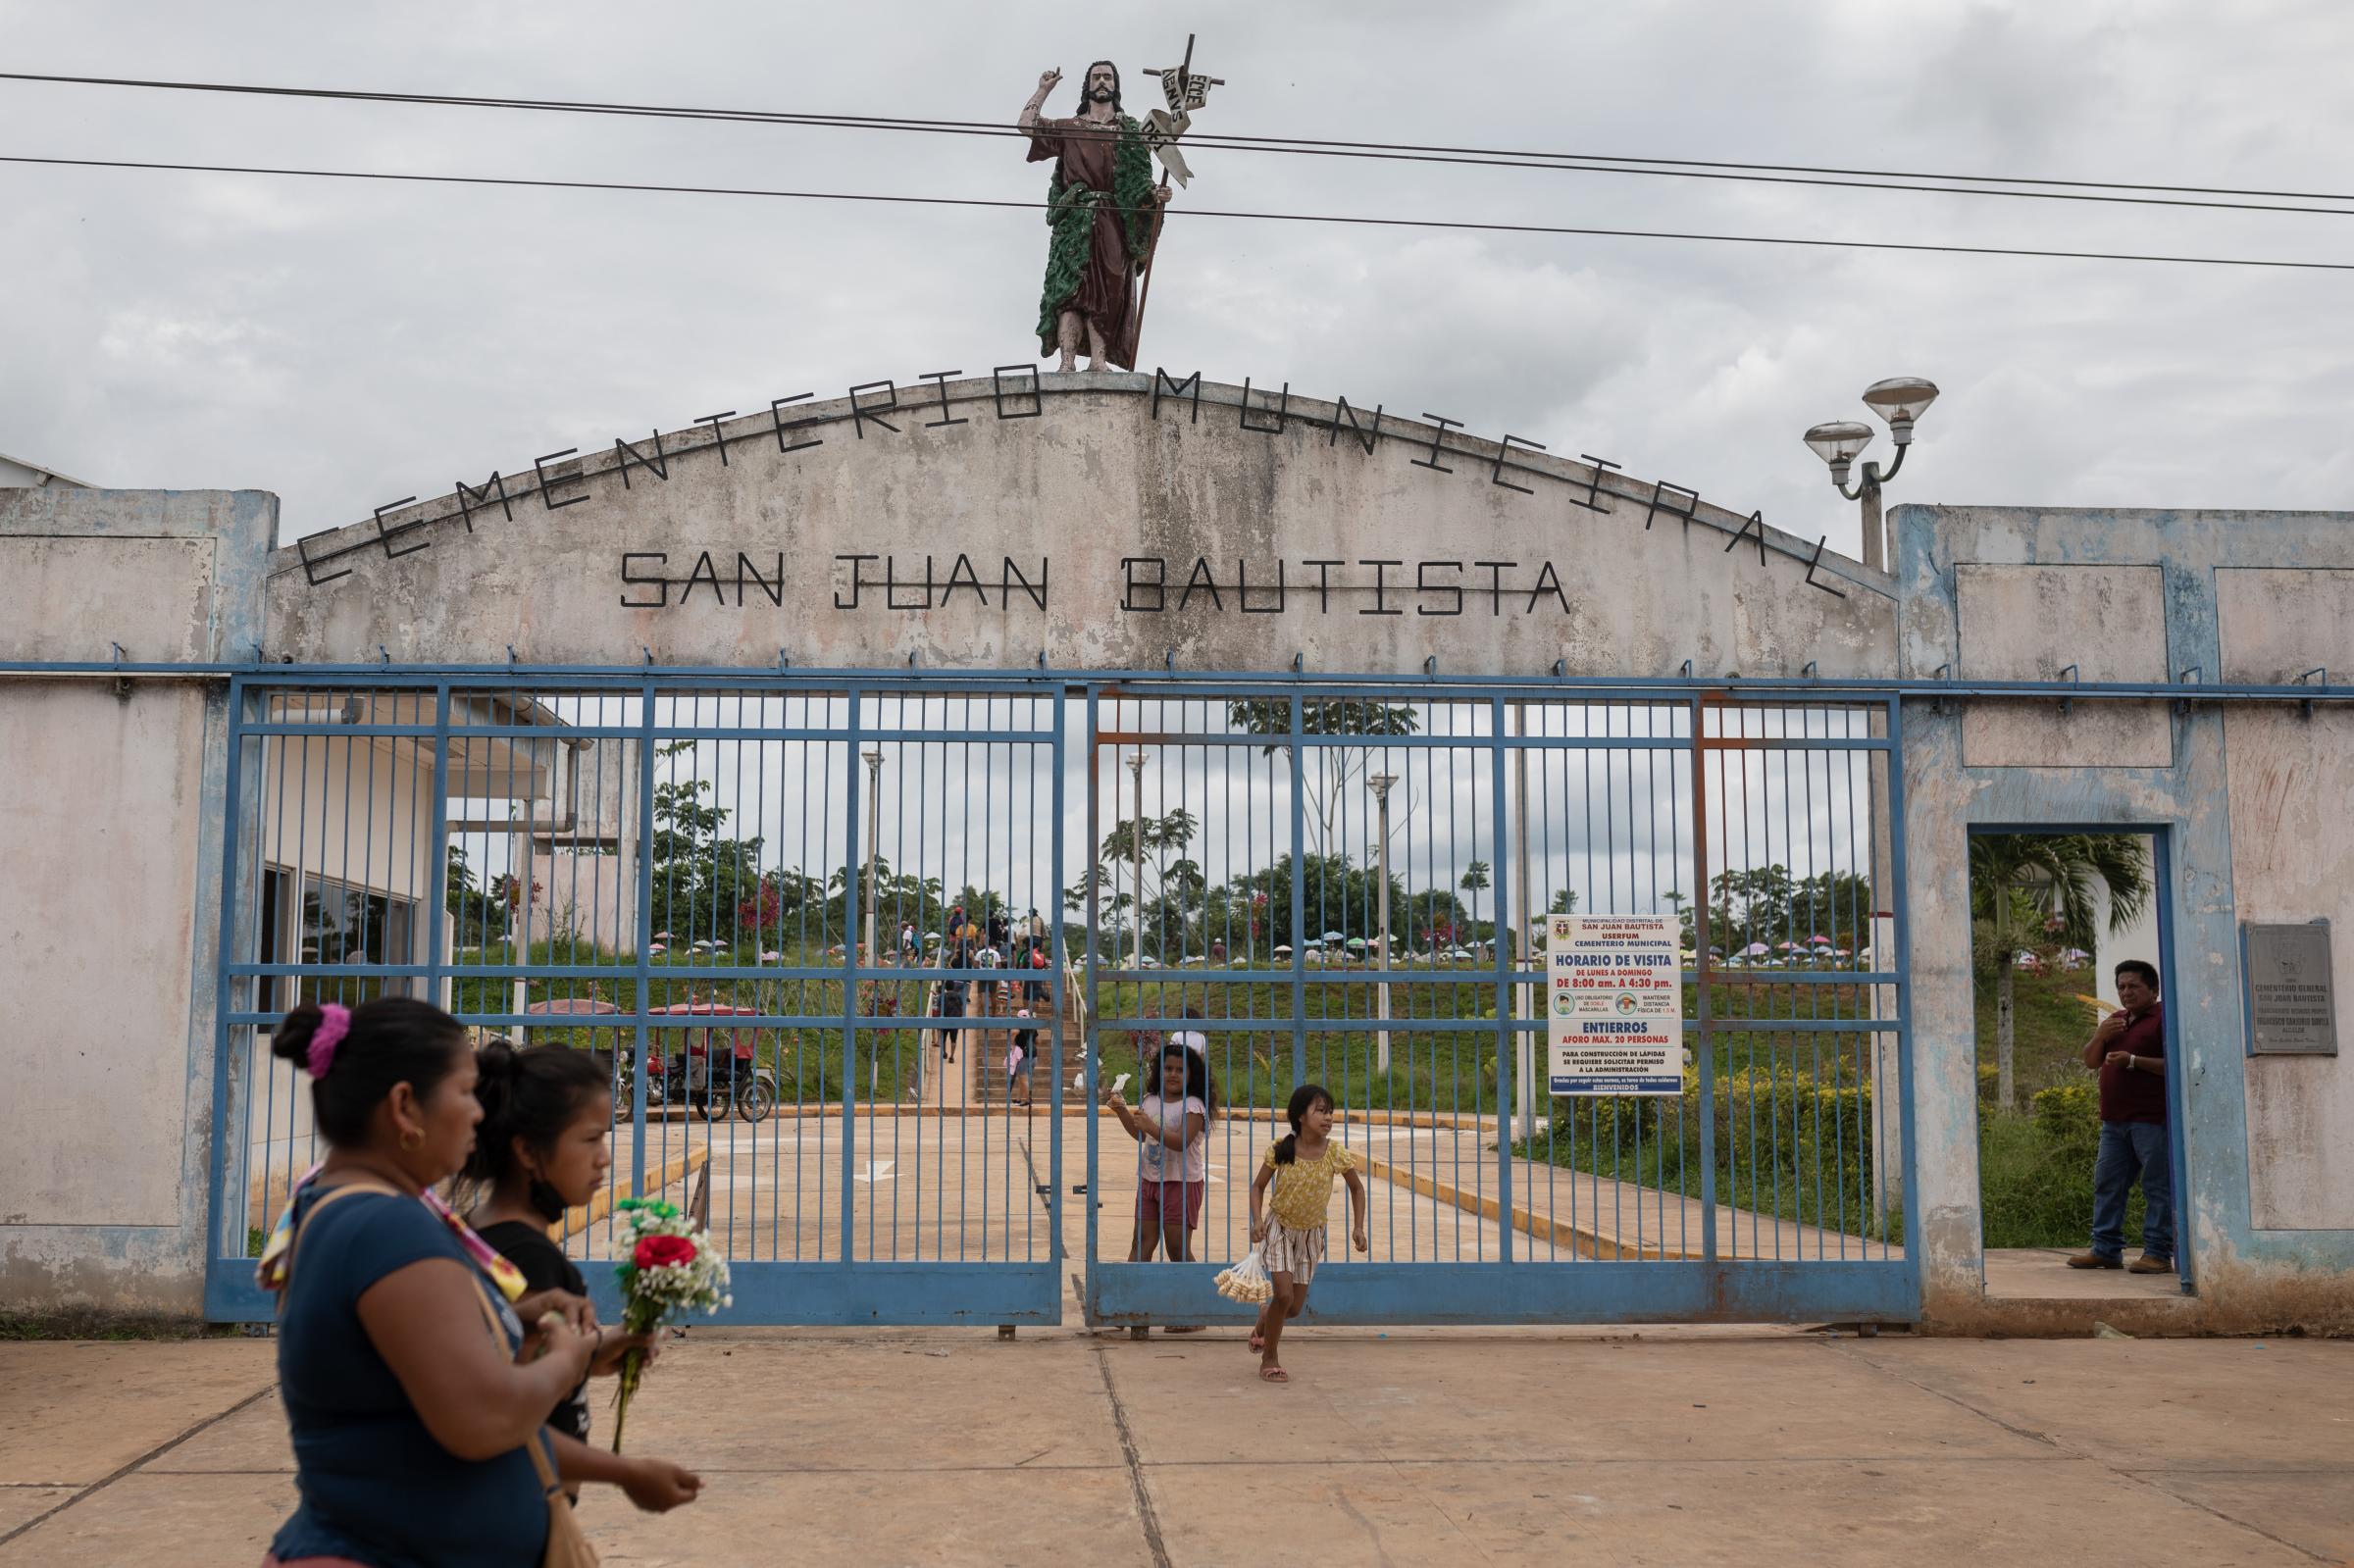 Vaccinators in Peru's Amazon are challenged by religion, rivers and a special tea - People visit the San Juan Bautista cemetery in Iquitos, Peru.